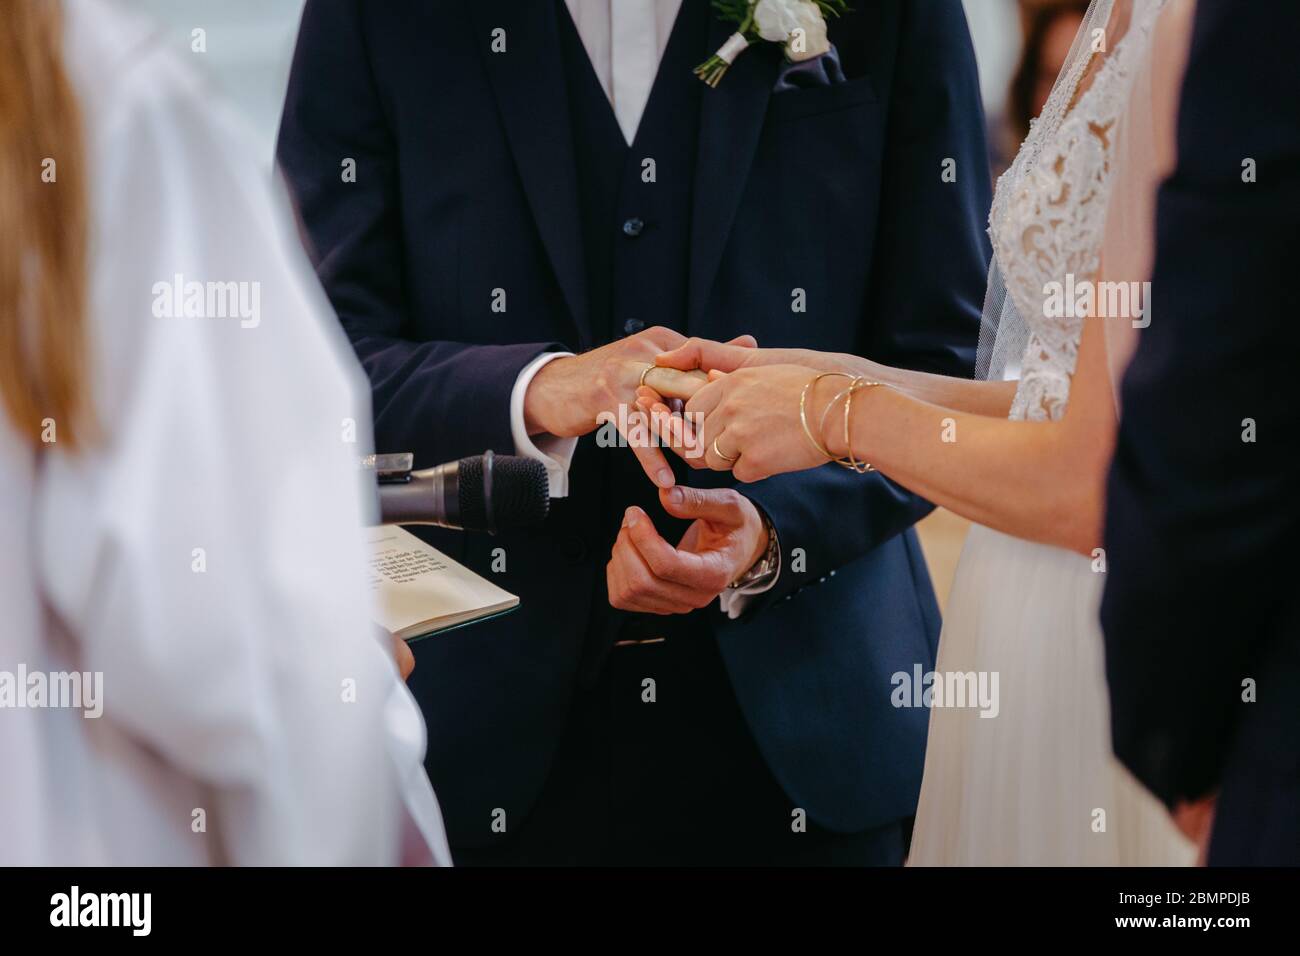 Bride and groom exchanging rings at their wedding Stock Photo